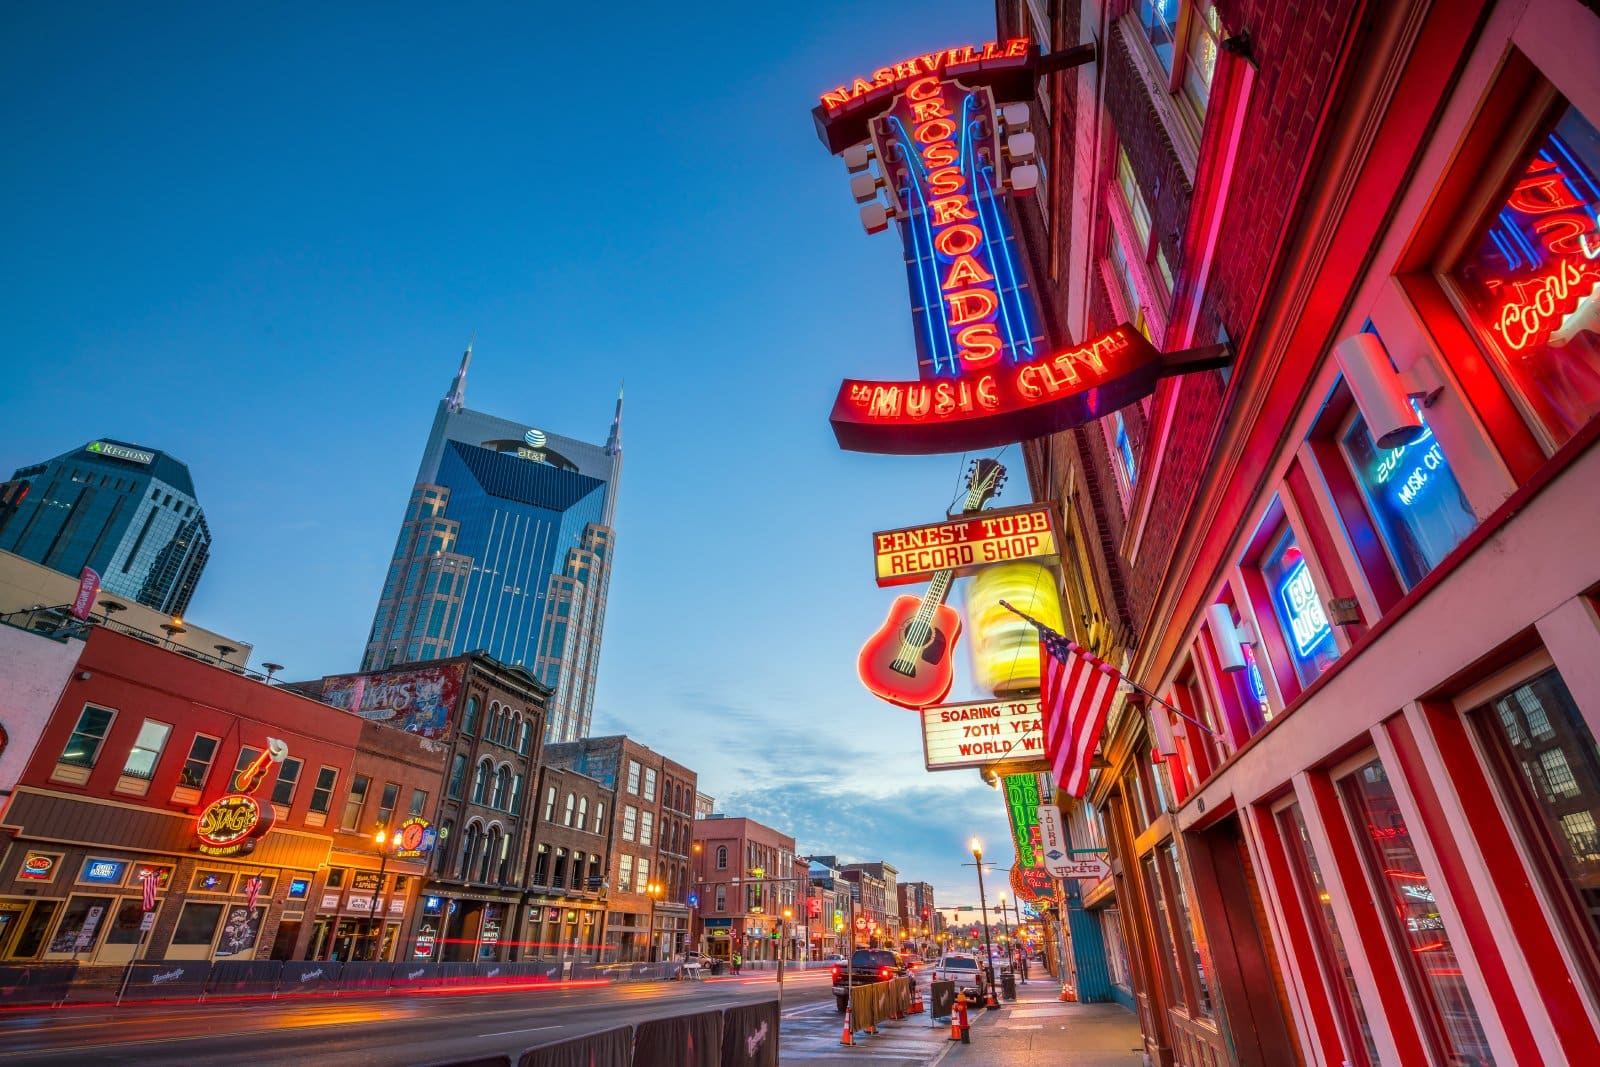 <p><span>Nashville’s heart beats to country music. The city’s rich musical landscape extends from the Grand Ole Opry to the honky-tonks of Broadway. Nashville’s music scene is vibrant and diverse, with rock, blues, and folk also taking center stage.</span></p> <p><span>The Country Music Hall of Fame and Museum offers a fascinating insight into the genre’s history, while live venues provide a platform for both established stars and emerging talents. </span></p> <p><b>Insider’s Tip: </b><span>Visit the Bluebird Cafe for an intimate and authentic songwriting experience. </span></p> <p><b>When to Travel: </b><span>April to October for pleasant weather and a full music calendar, including the CMA Music Festival in June. </span></p> <p><b>How to Get There: </b><span>Nashville International Airport serves the city, and its central location makes it a great road trip destination.</span></p>